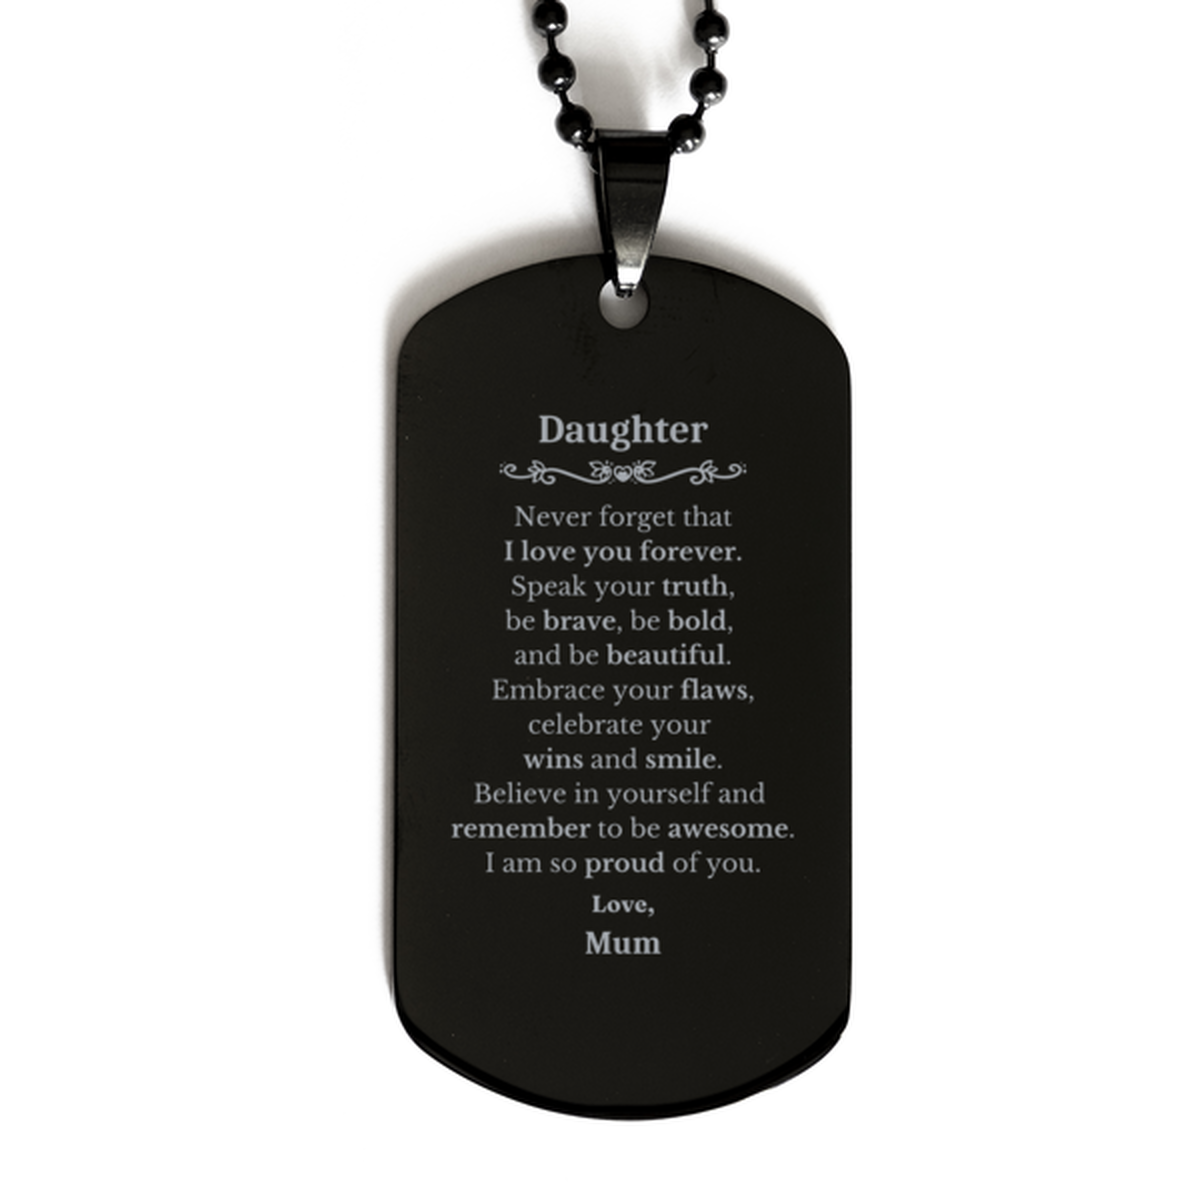 Daughter Black Dog Tag, Never forget that I love you forever, Inspirational Daughter Birthday Unique Gifts From Mum